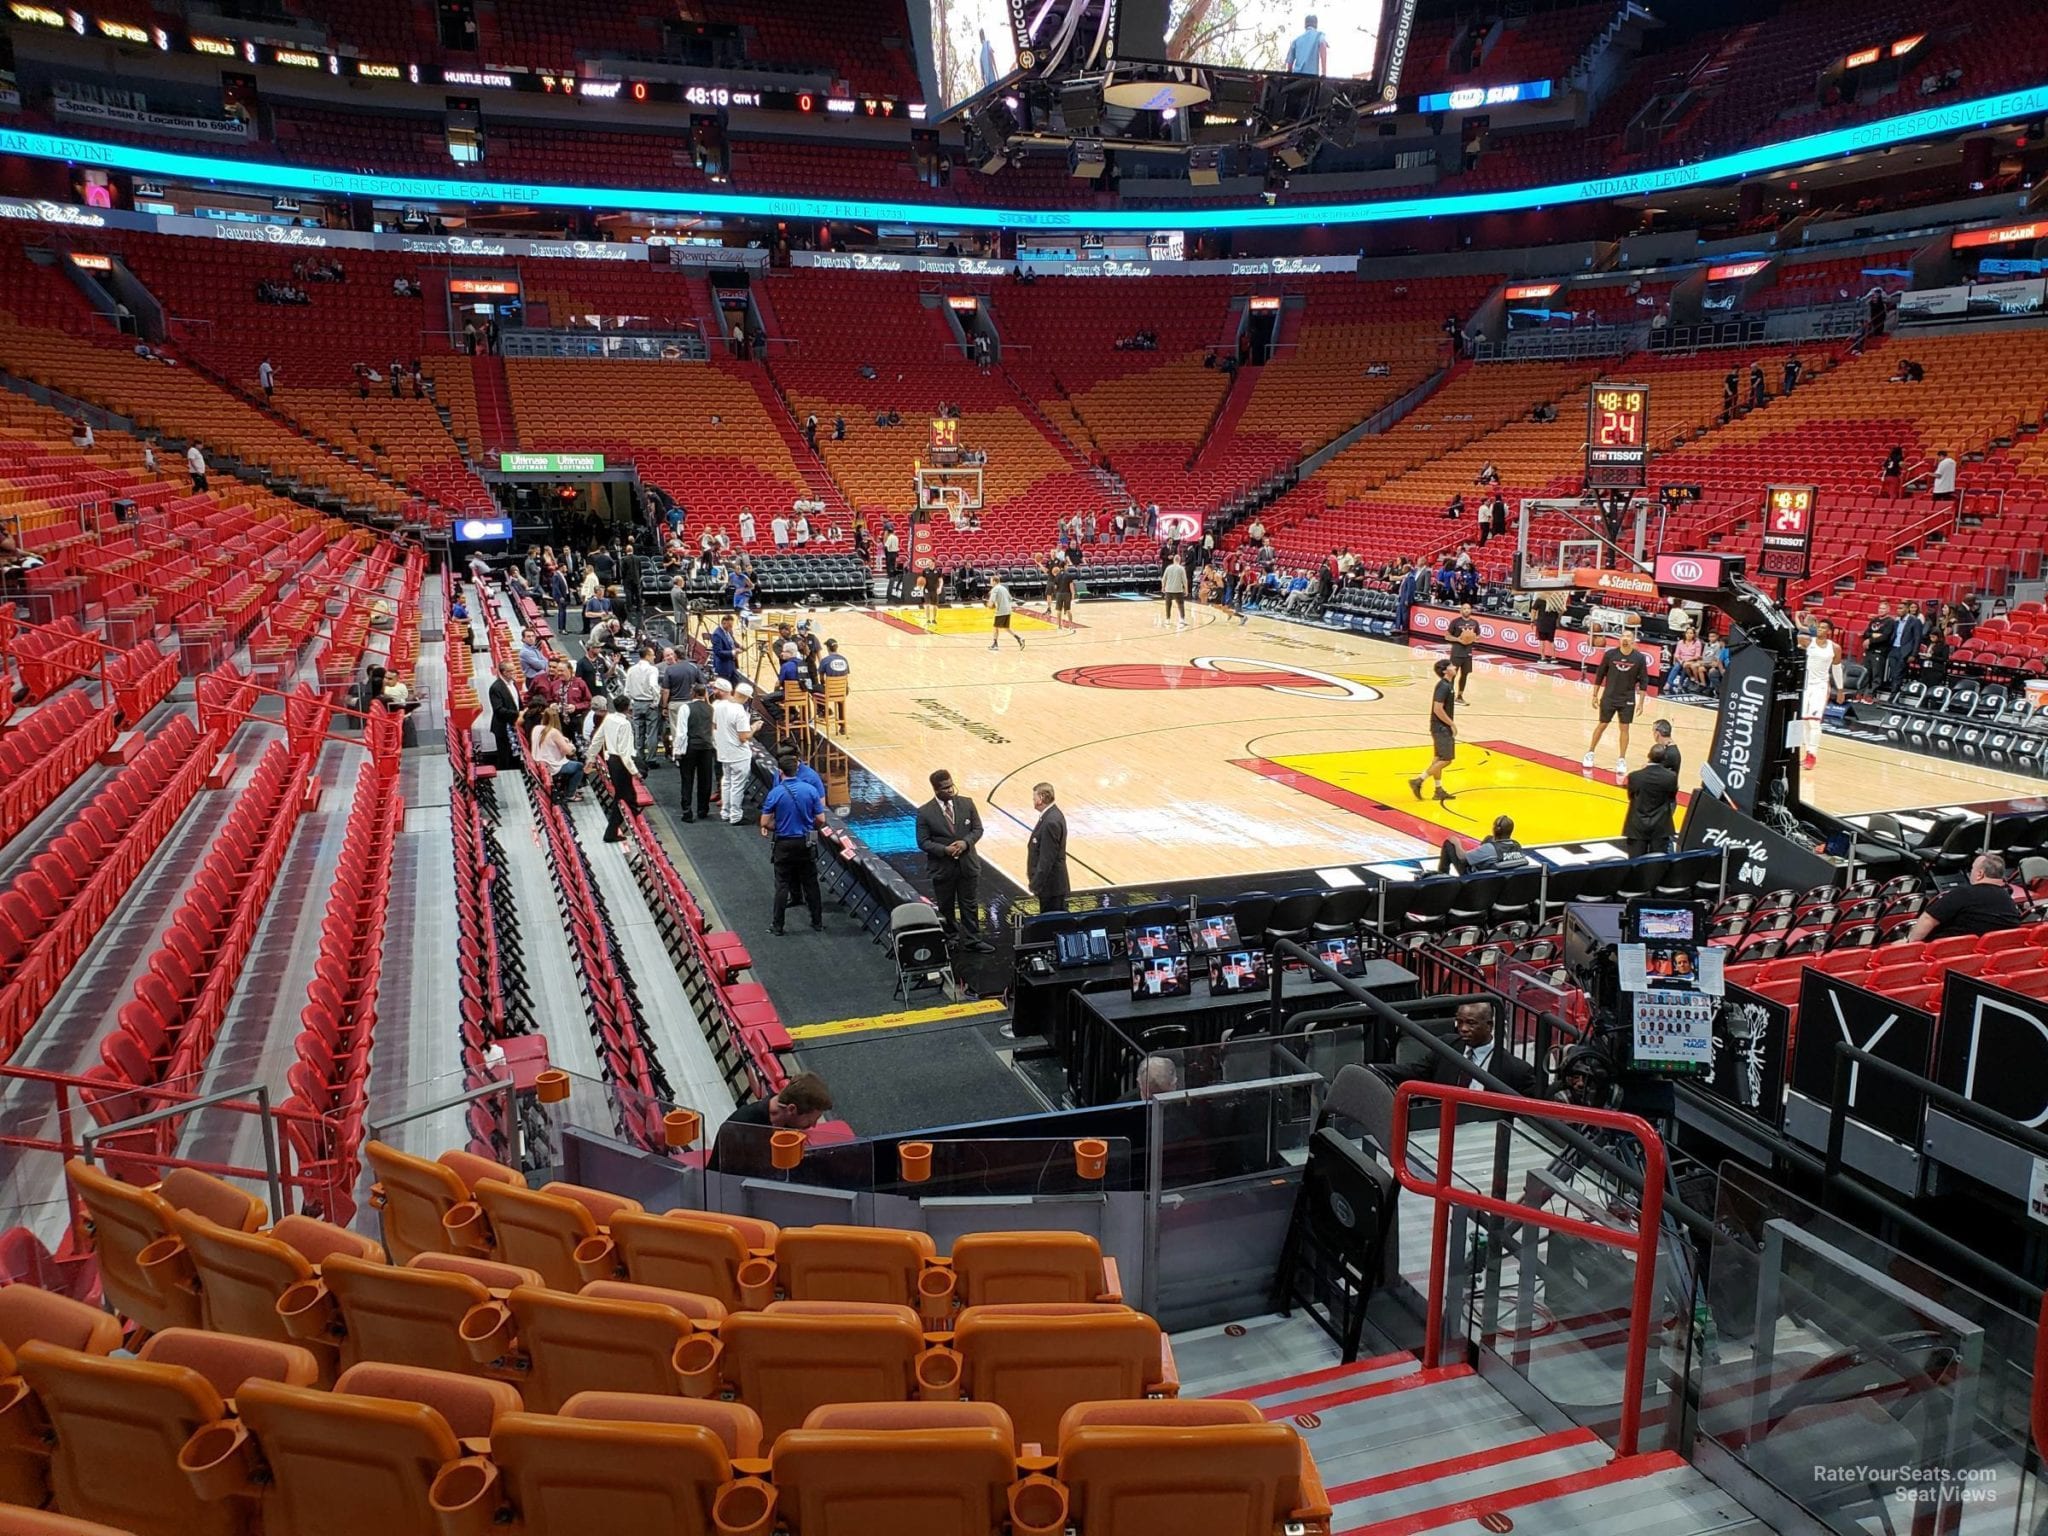 The lower bowl of the American Airlines Arena, home of the Miami Heat